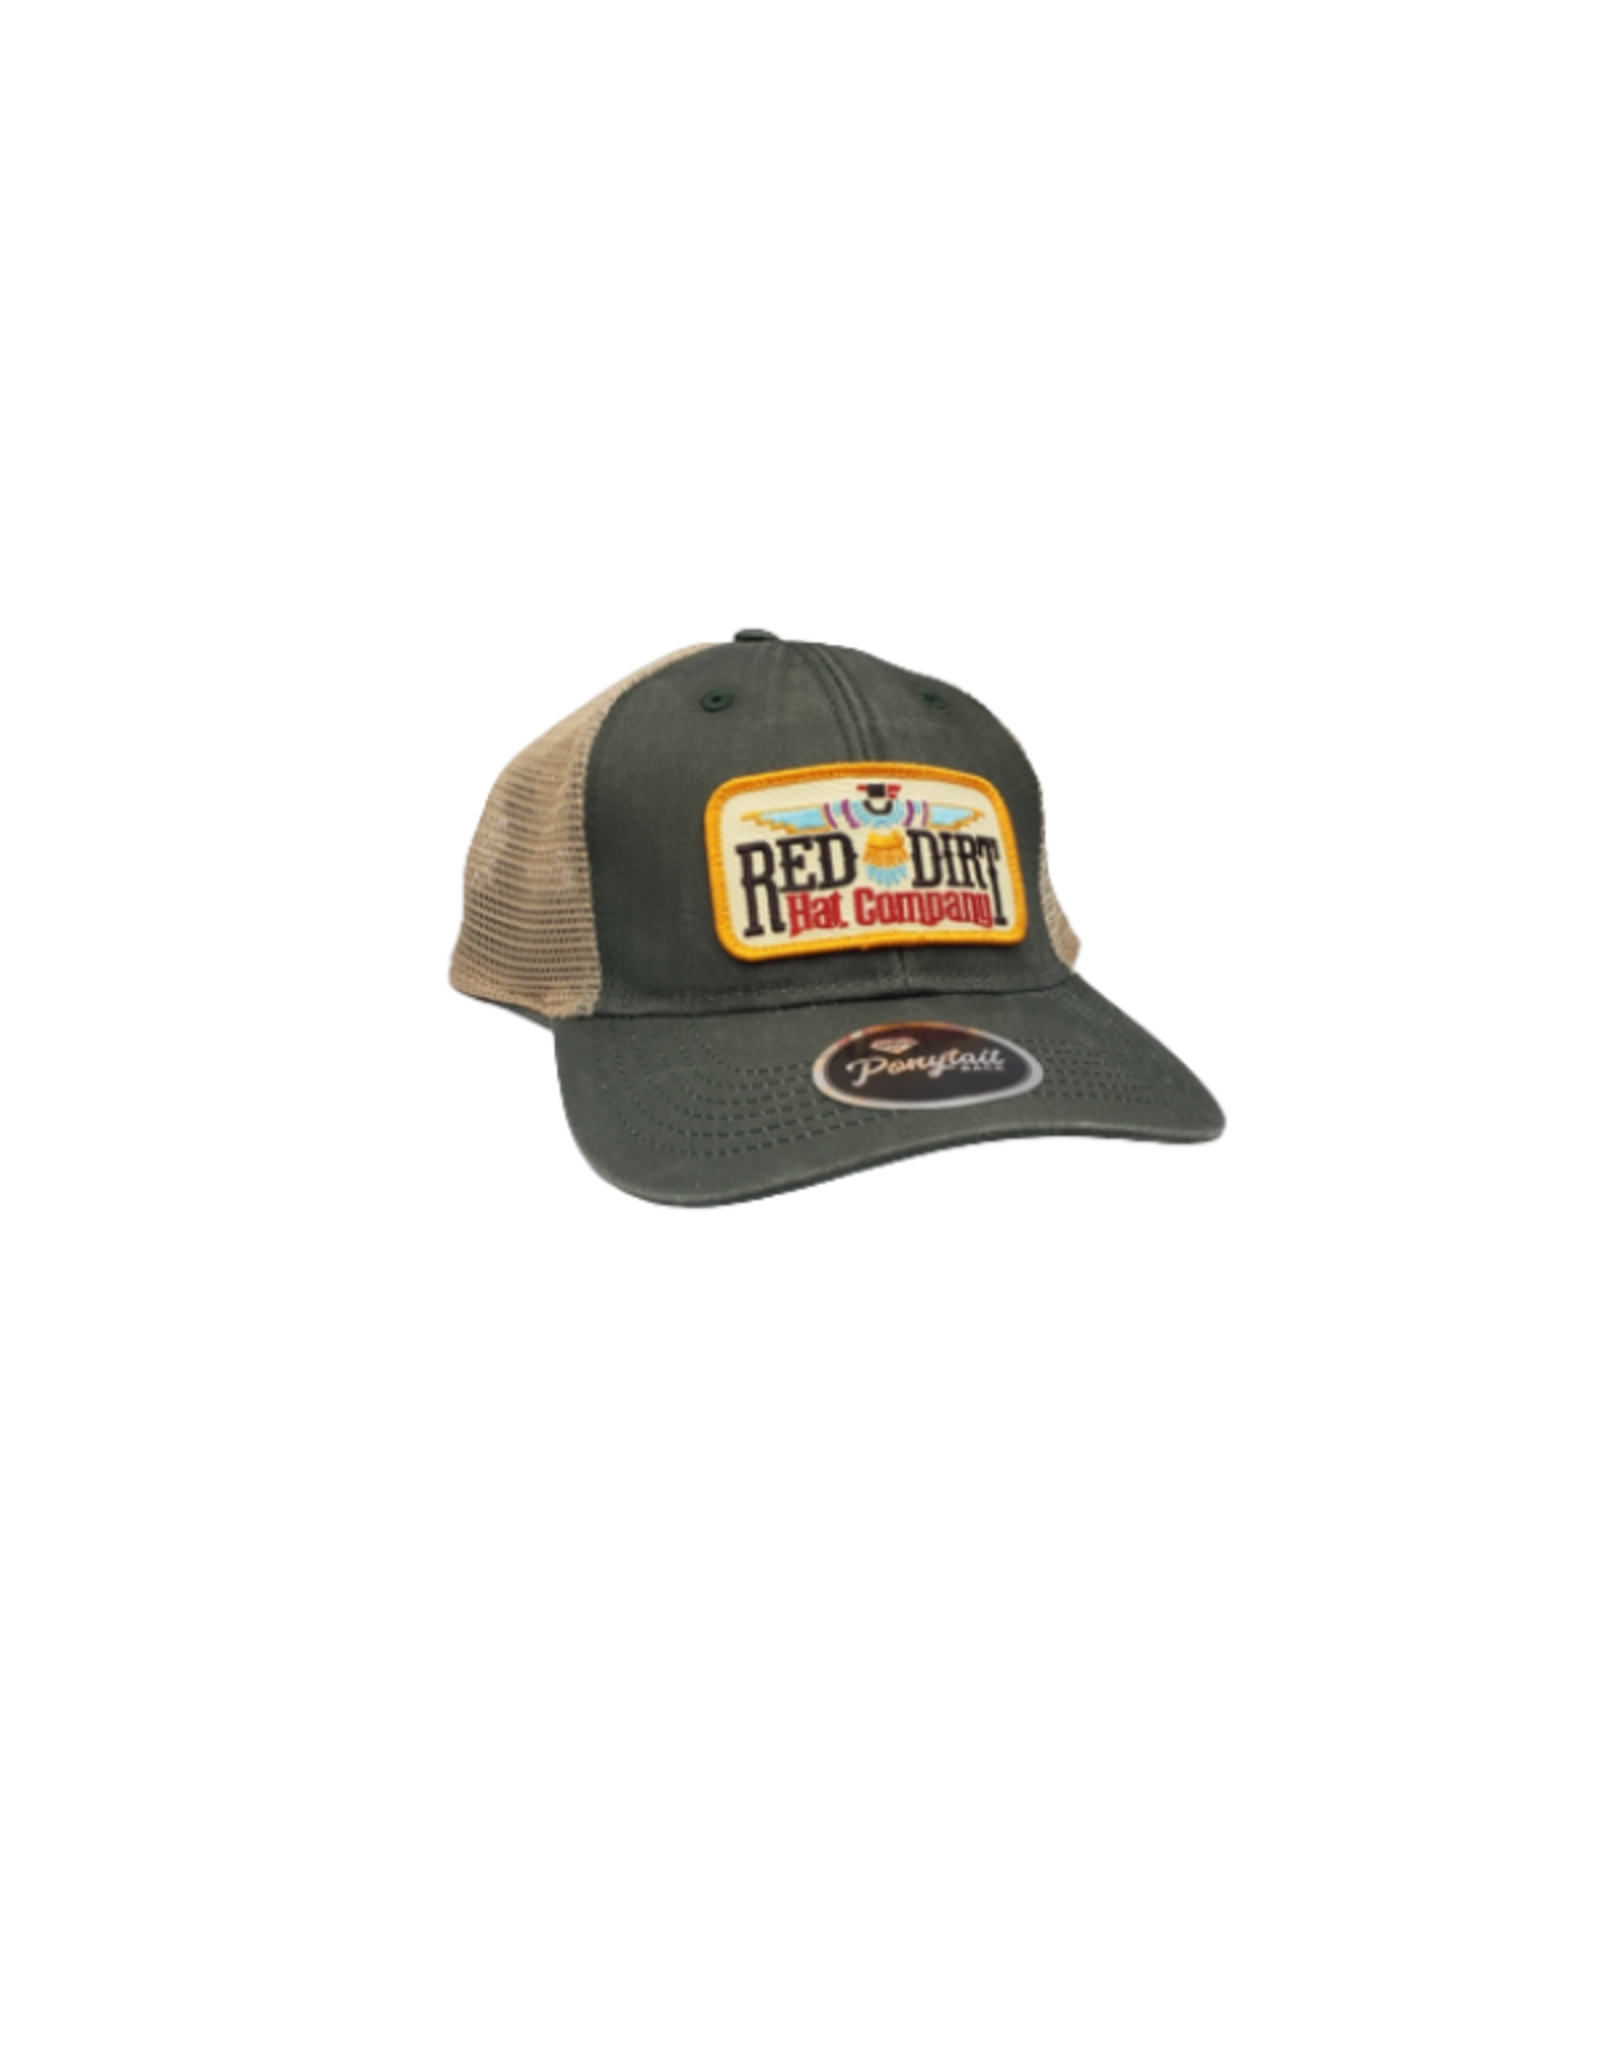 Red Dirt Hat Company Red Dirt Hat Co. Thunderbird Ponytail Hat RDHC269 Cap